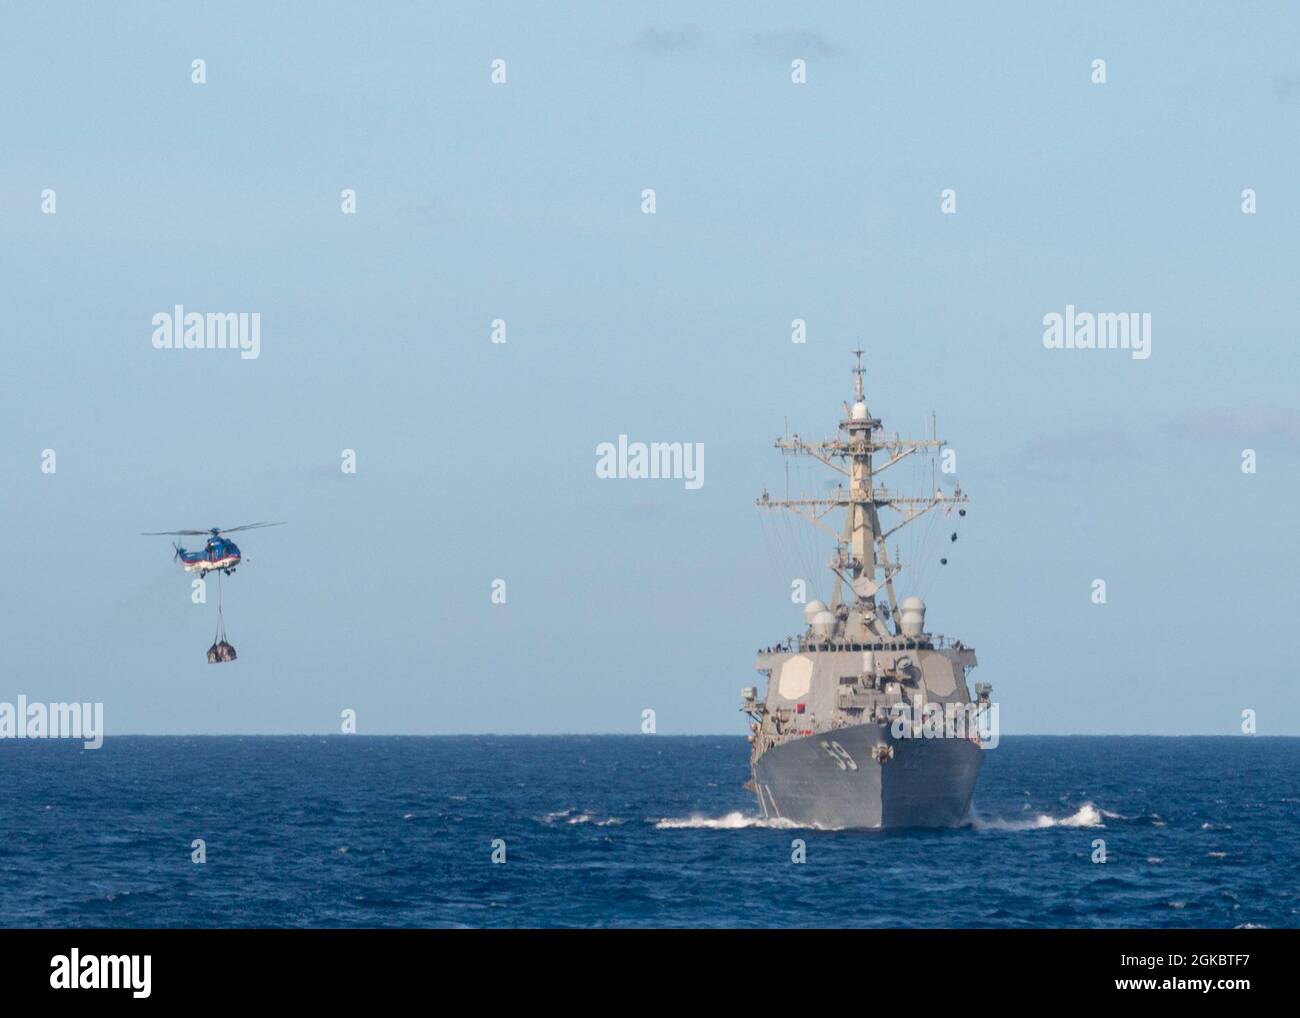 PACIFIC OCEAN (March 6, 2021) An H225 Super Puma helicopter, assigned to the Lewis and Clark-class dry cargo and ammunition ship USNS Charles Drew (T-AKE 10), airlifts supplies to the Arleigh Burke-class guided-missile destroyer USS Russell (DDG 59) during a vertical replenishment March 6, 2021. Russell, part of the Theodore Roosevelt Carrier Strike Group, is on a scheduled deployment to the U.S. 7th Fleet area of operations. As the U.S. Navy’s largest forward-deployed fleet, 7th Fleet routinely operates and interacts with 35 maritime nations while conducting missions to preserve and protect a Stock Photo